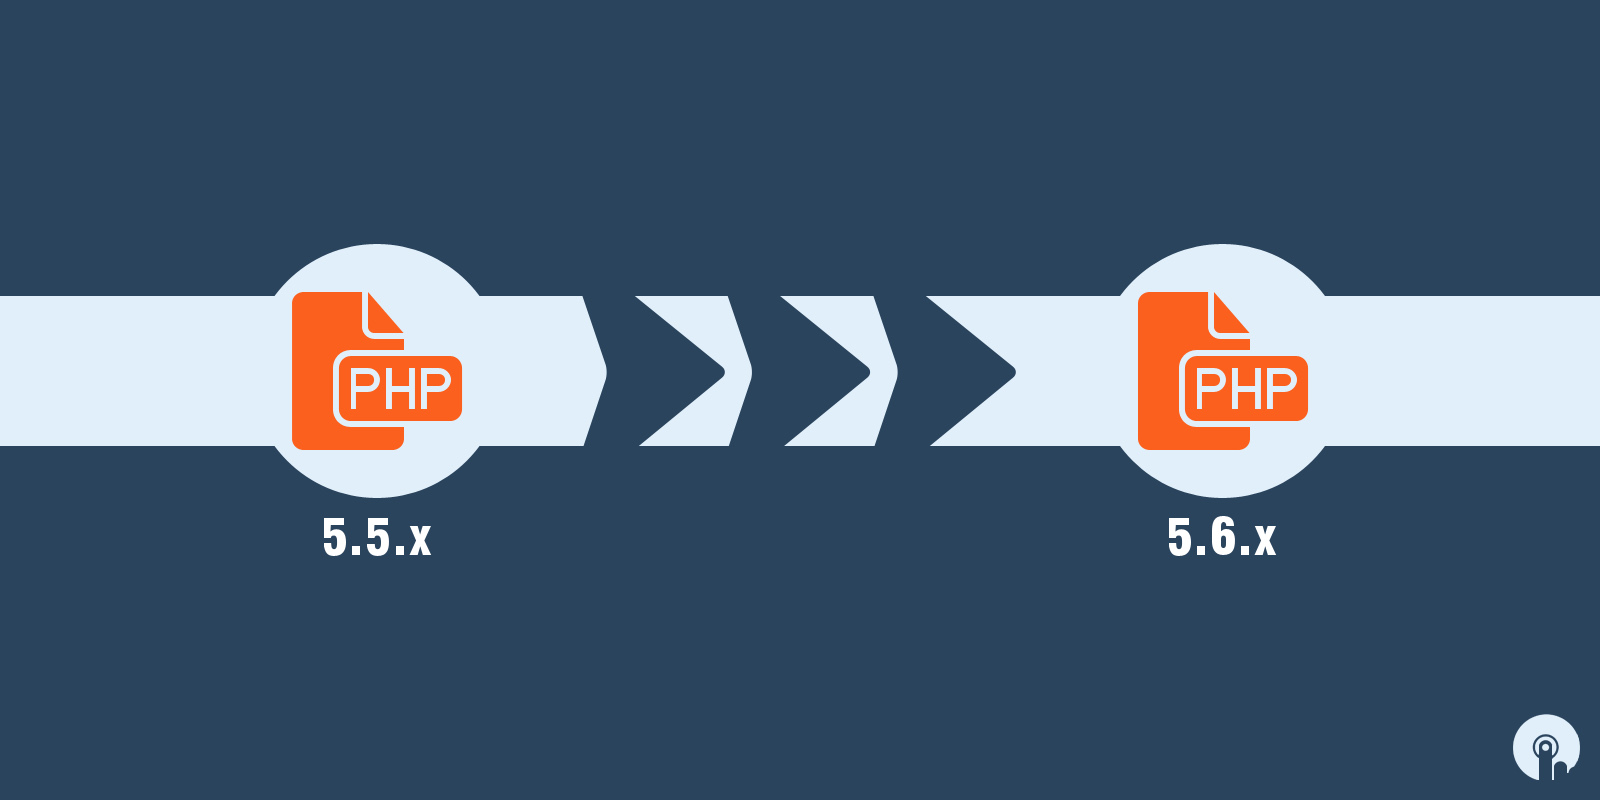 PHP 5.5.x To PHP 5.6.x